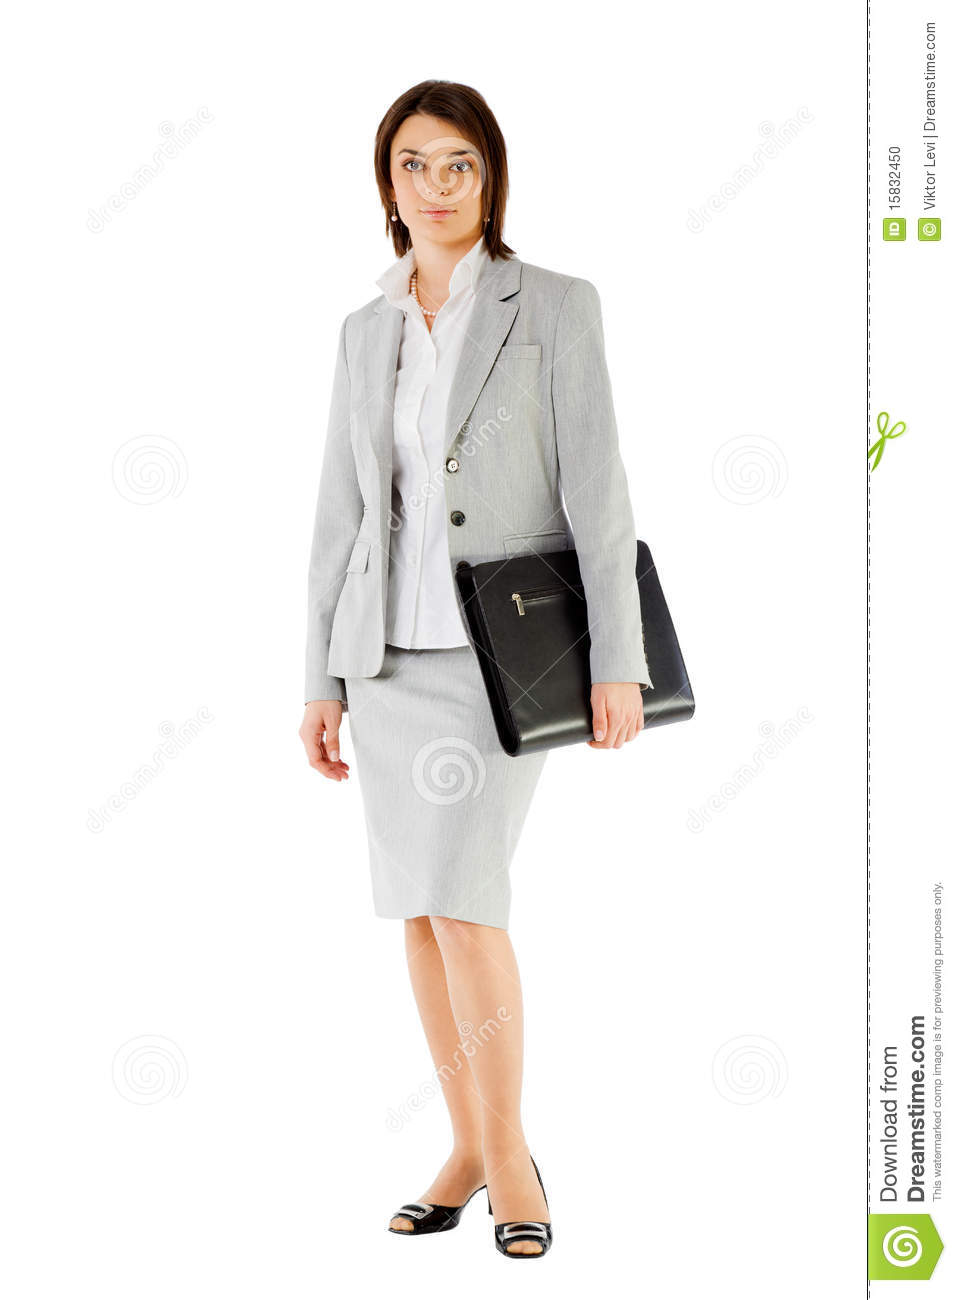 Woman in Business Suit with Briefcase